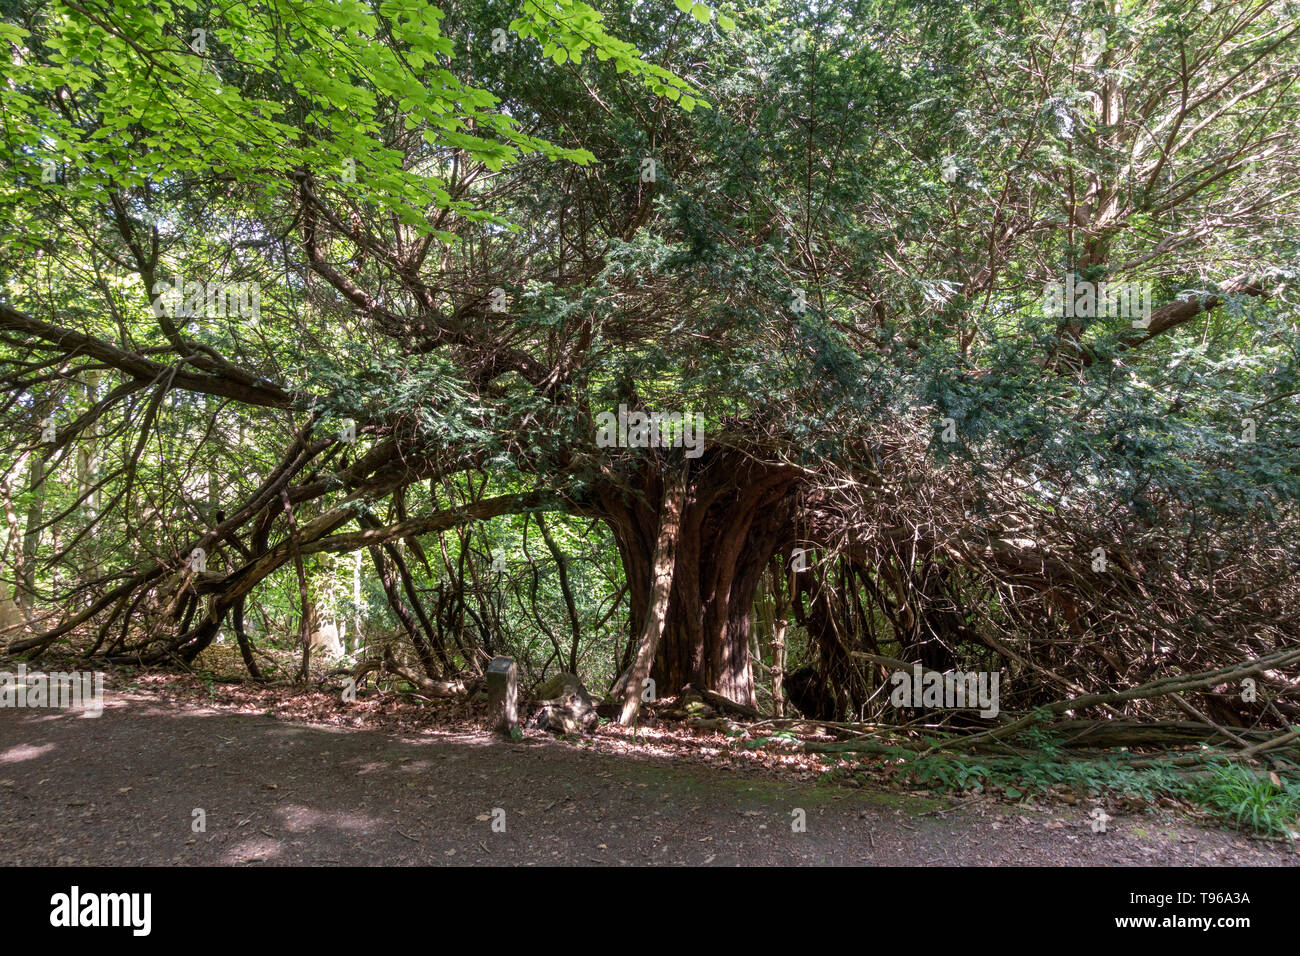 An old yew tree (Taxus baccata) in Druids Grove, Norbury Park, Mickleham, Surrey, UK (May 2019). Stock Photo